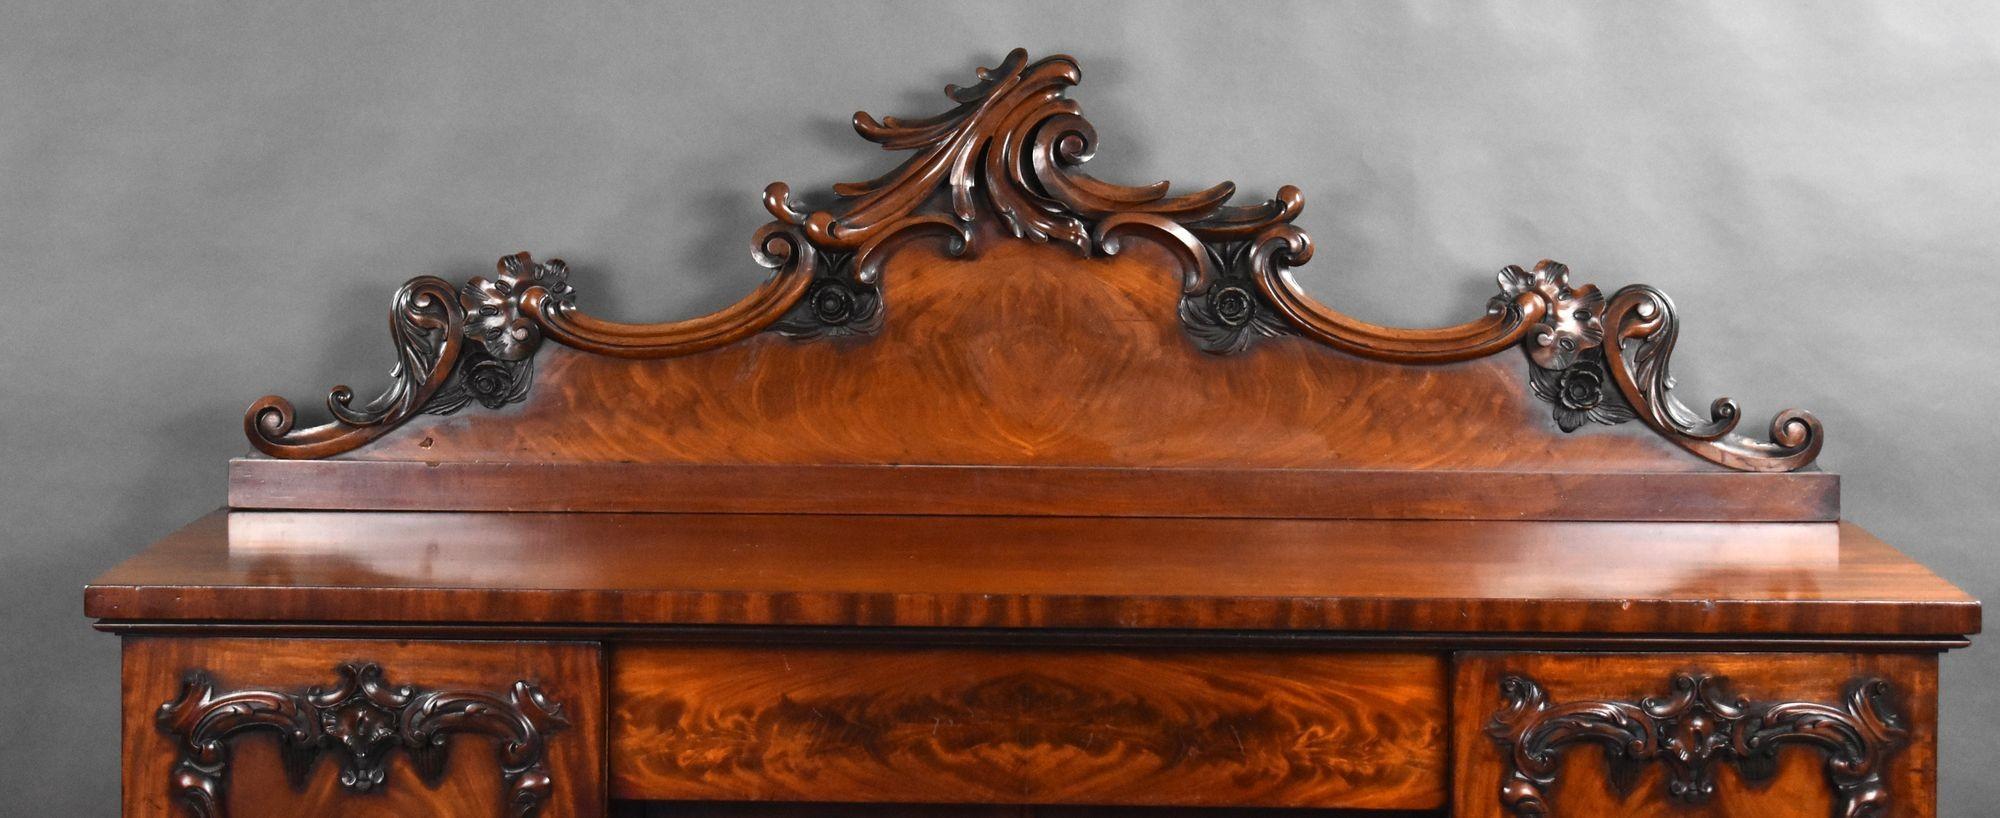 English Victorian Flame Mahogany Sideboard For Sale